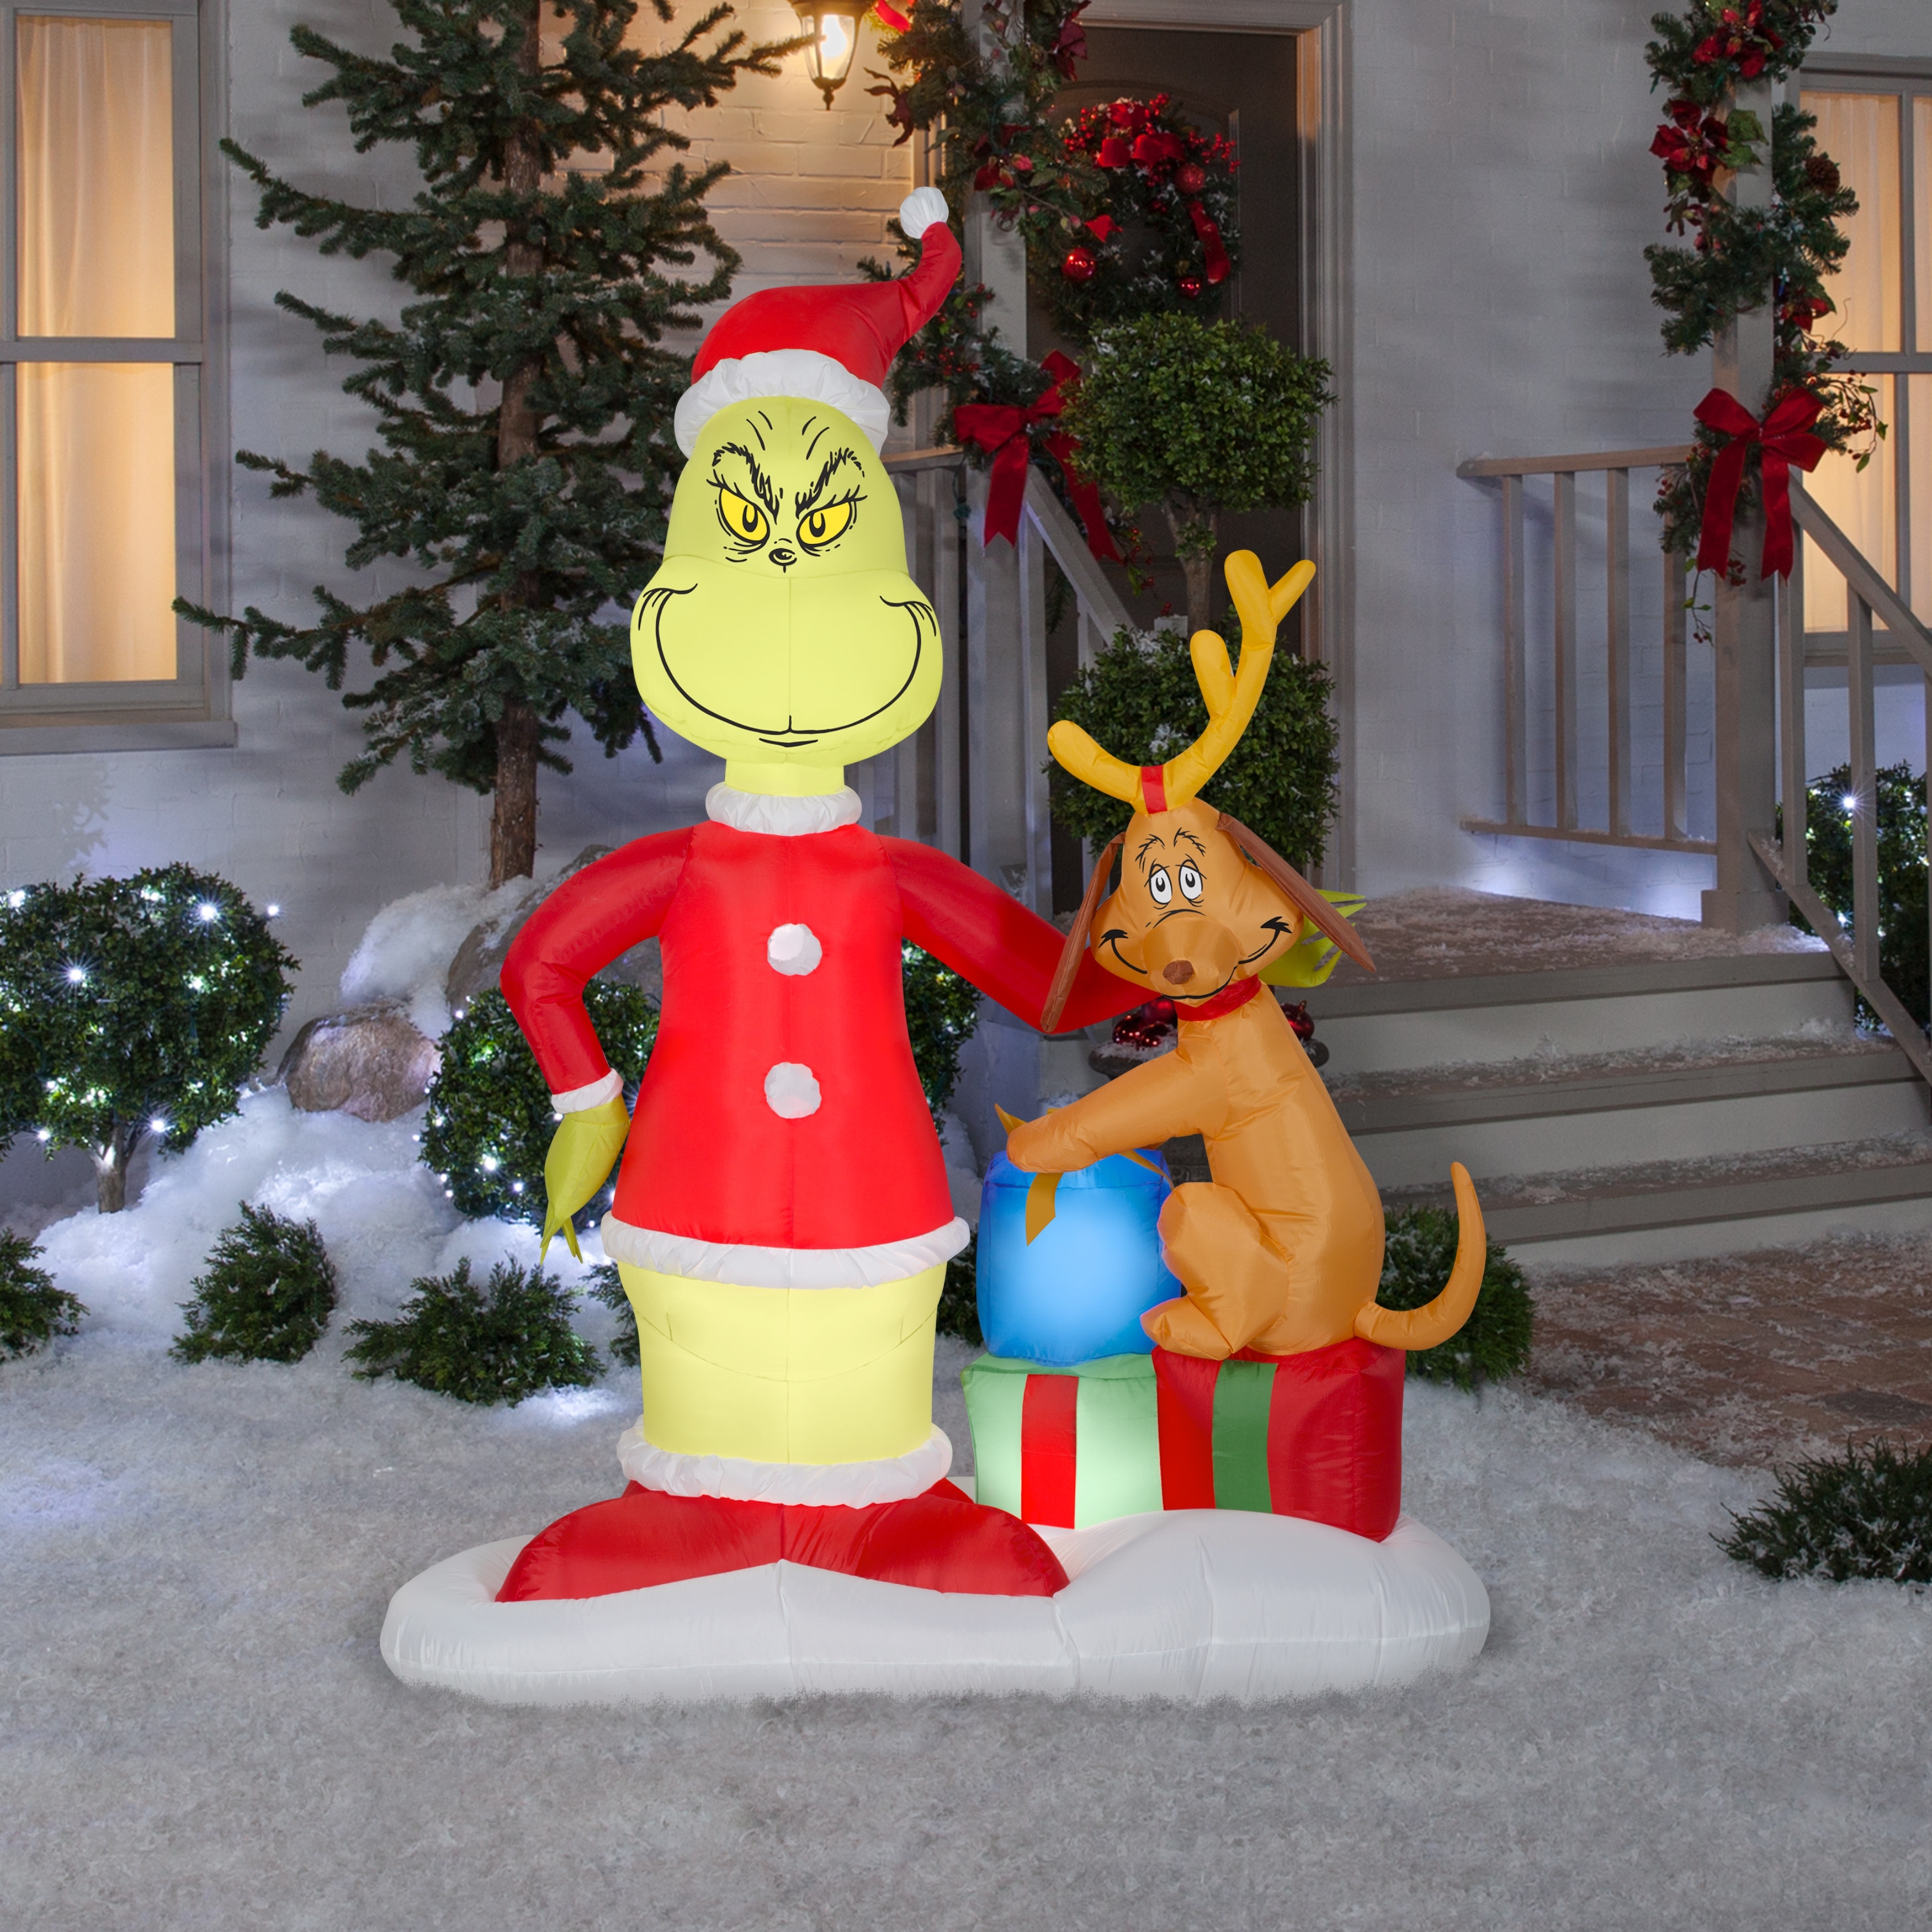 https://ak1.ostkcdn.com/images/products/is/images/direct/9f337efded579e85a322995ec0c04b8e831c5105/Gemmy-Christmas-Airblown-Inflatable-Grinch-and-Max-w-Presents-Scene-Dr.-Seuss-%2C-6-ft-Tall%2C-Multi.jpg